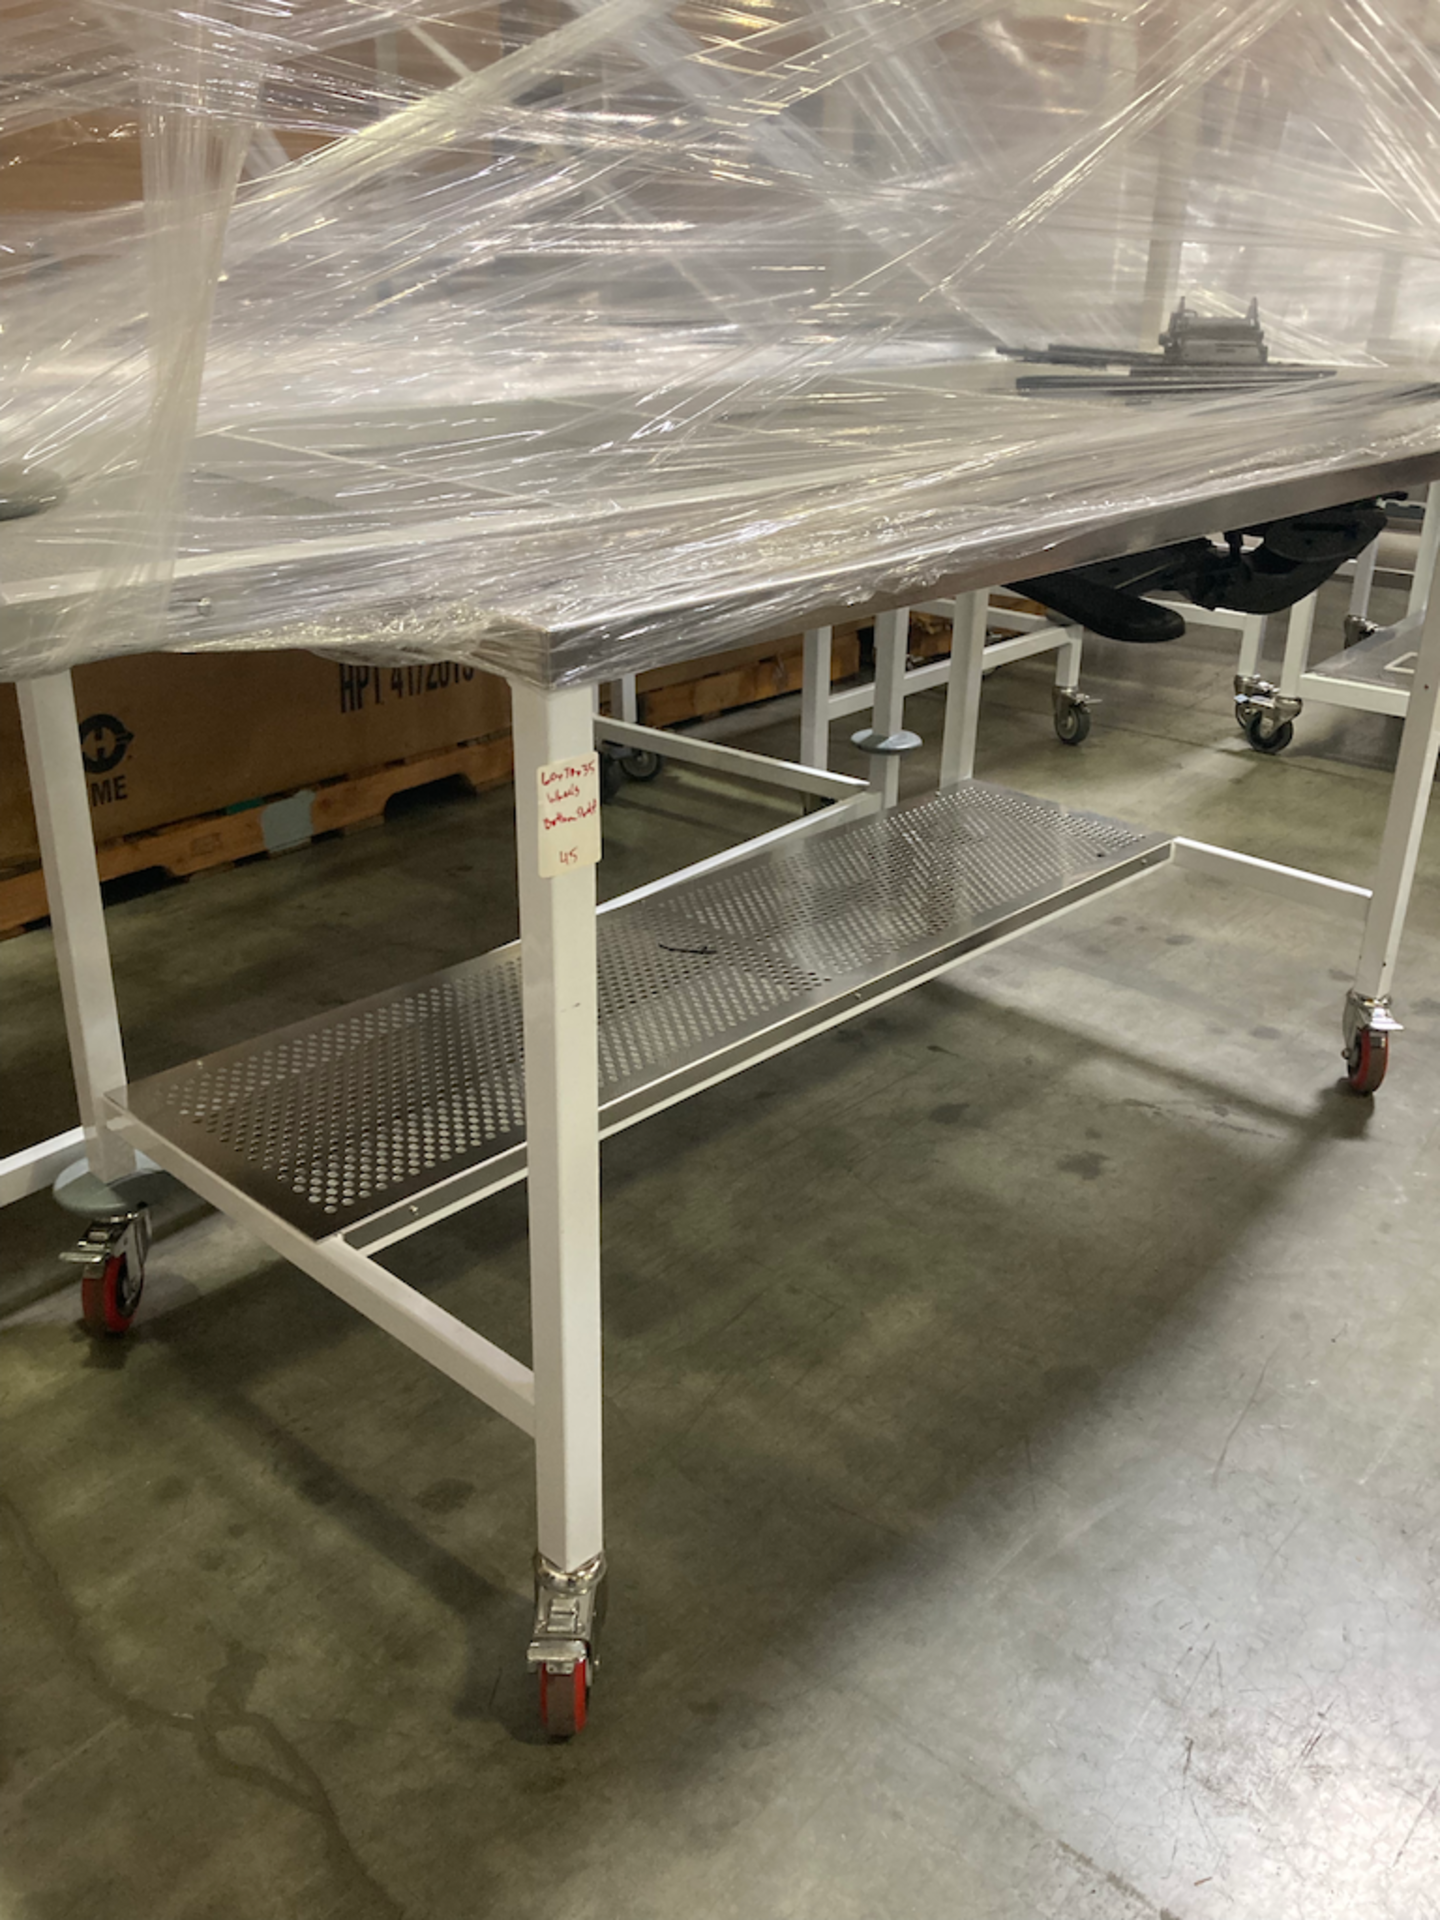 60 x 30 x 35 Perforated Stainless Steel Cleanroom Table Wheels, Bottom Shelf - Image 2 of 3